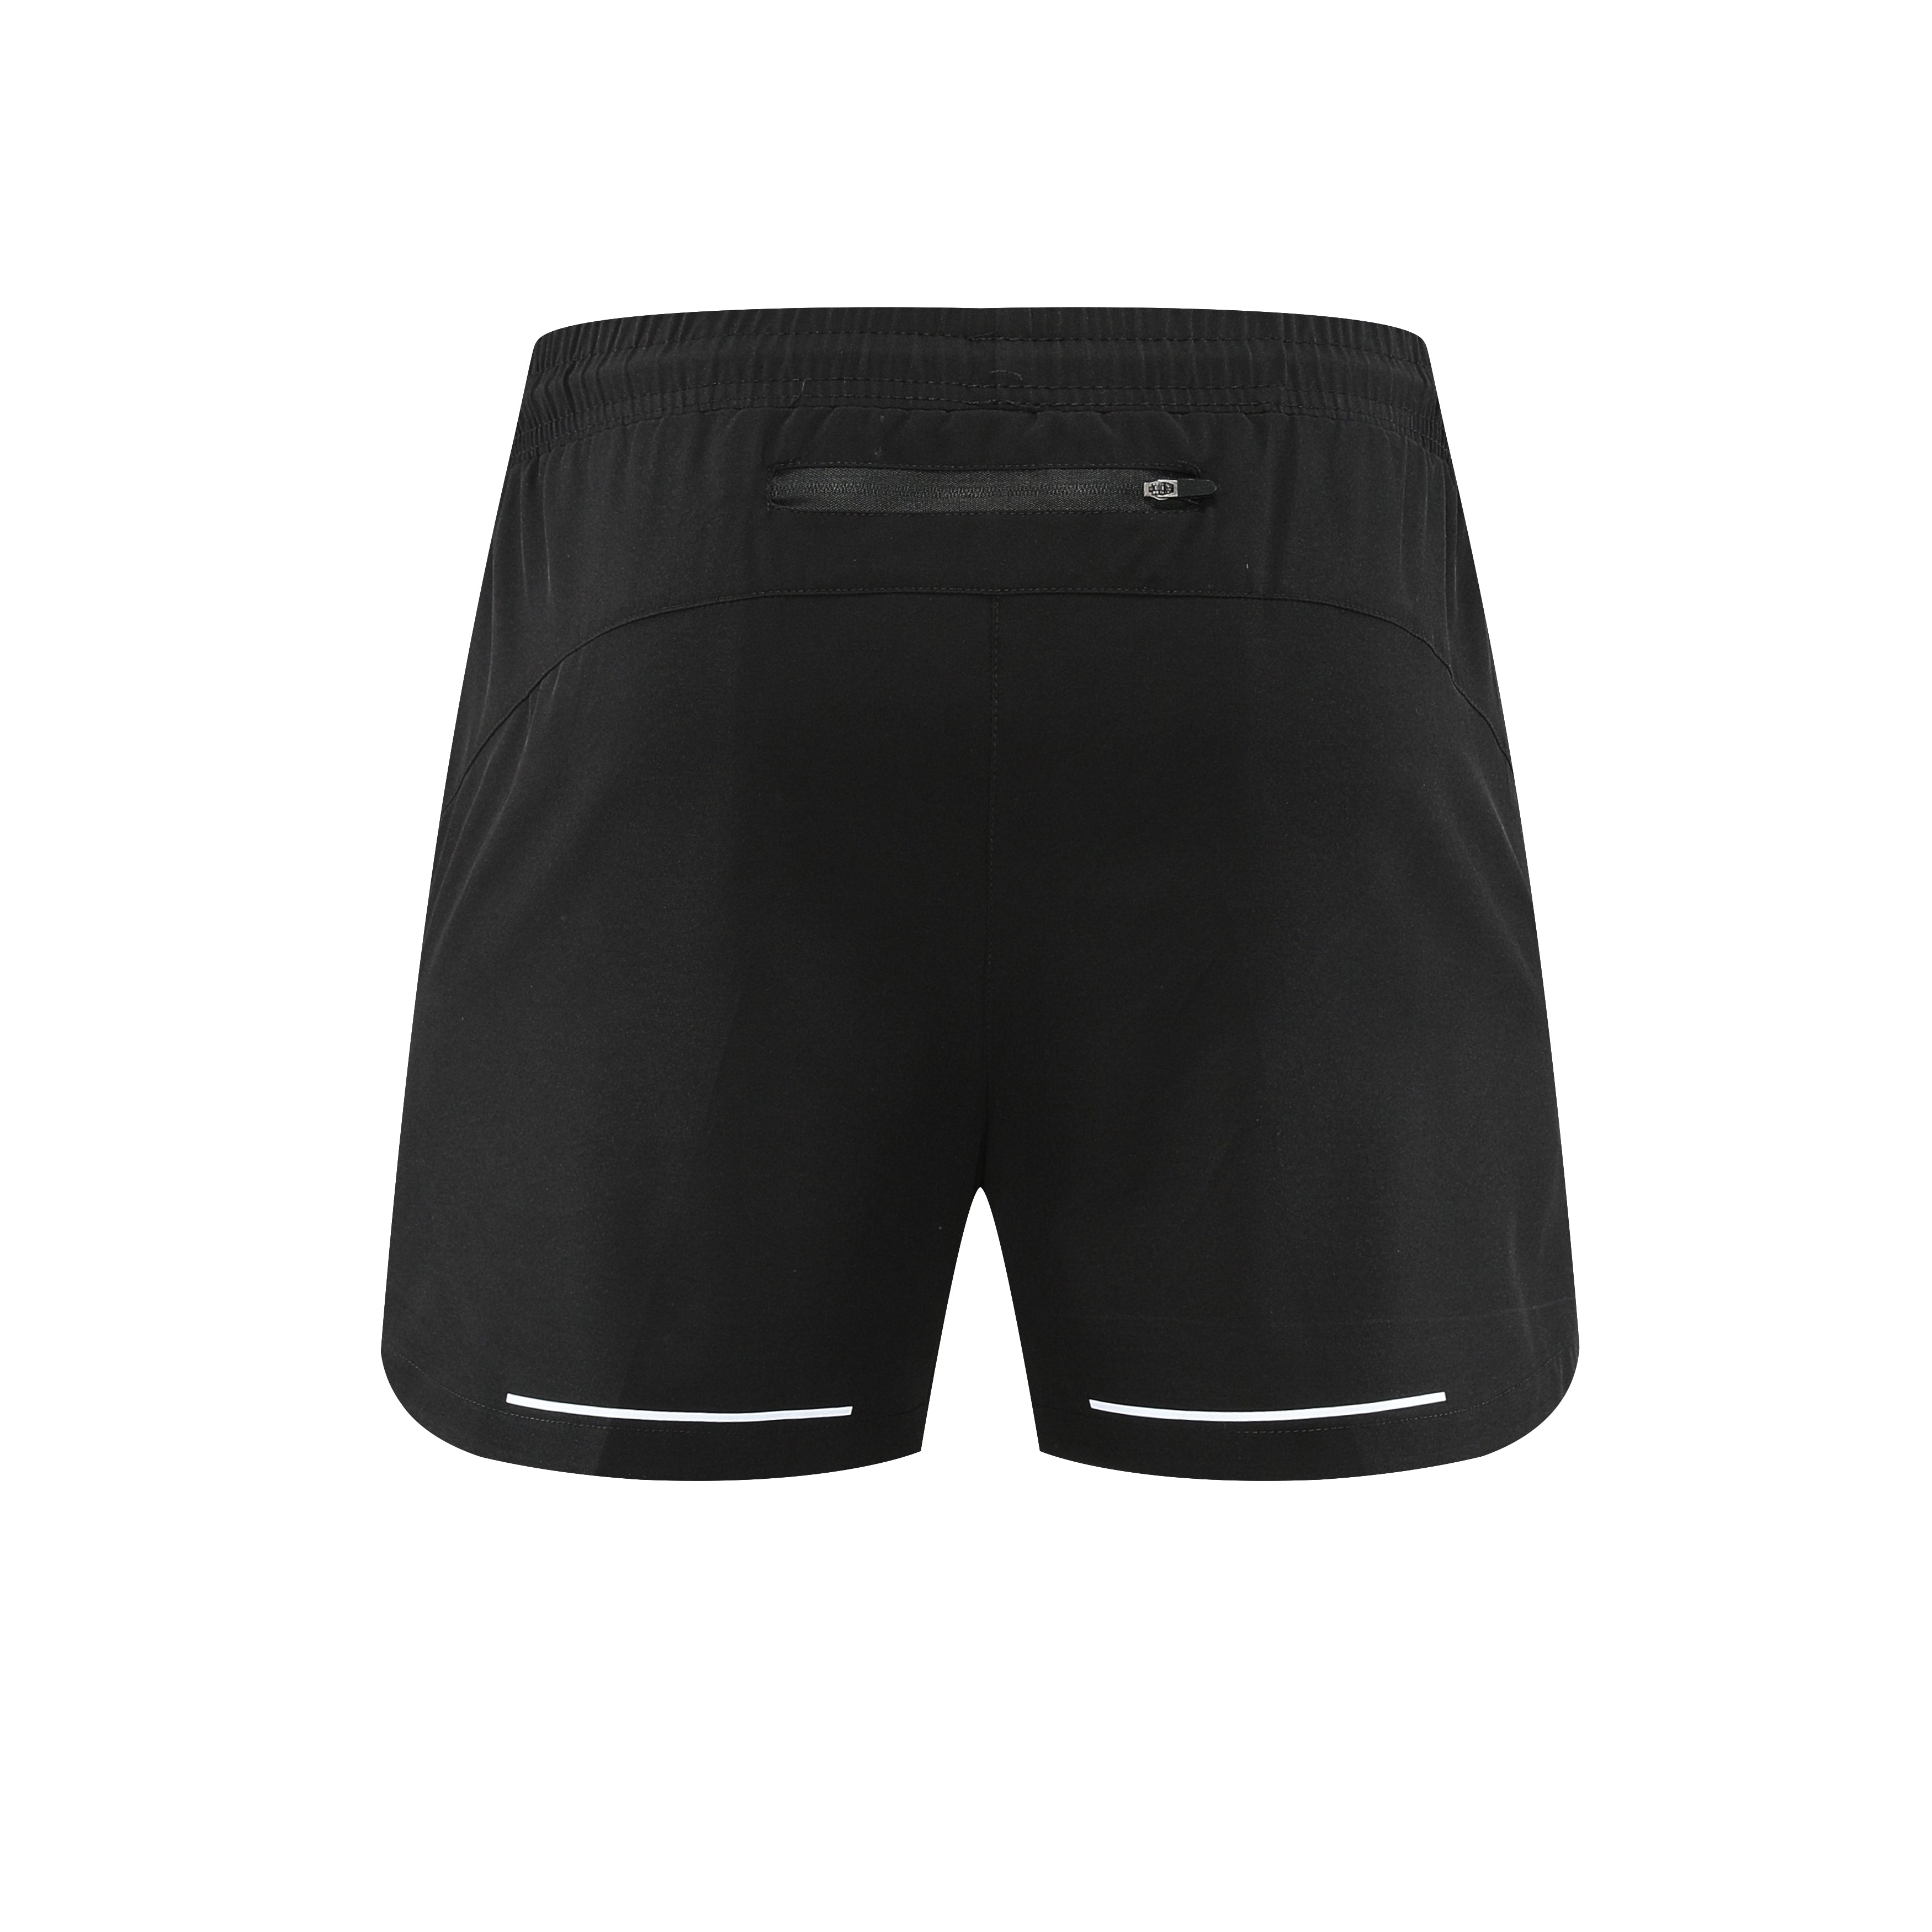 Men's Quick Dry Freedom Graphic Shorts